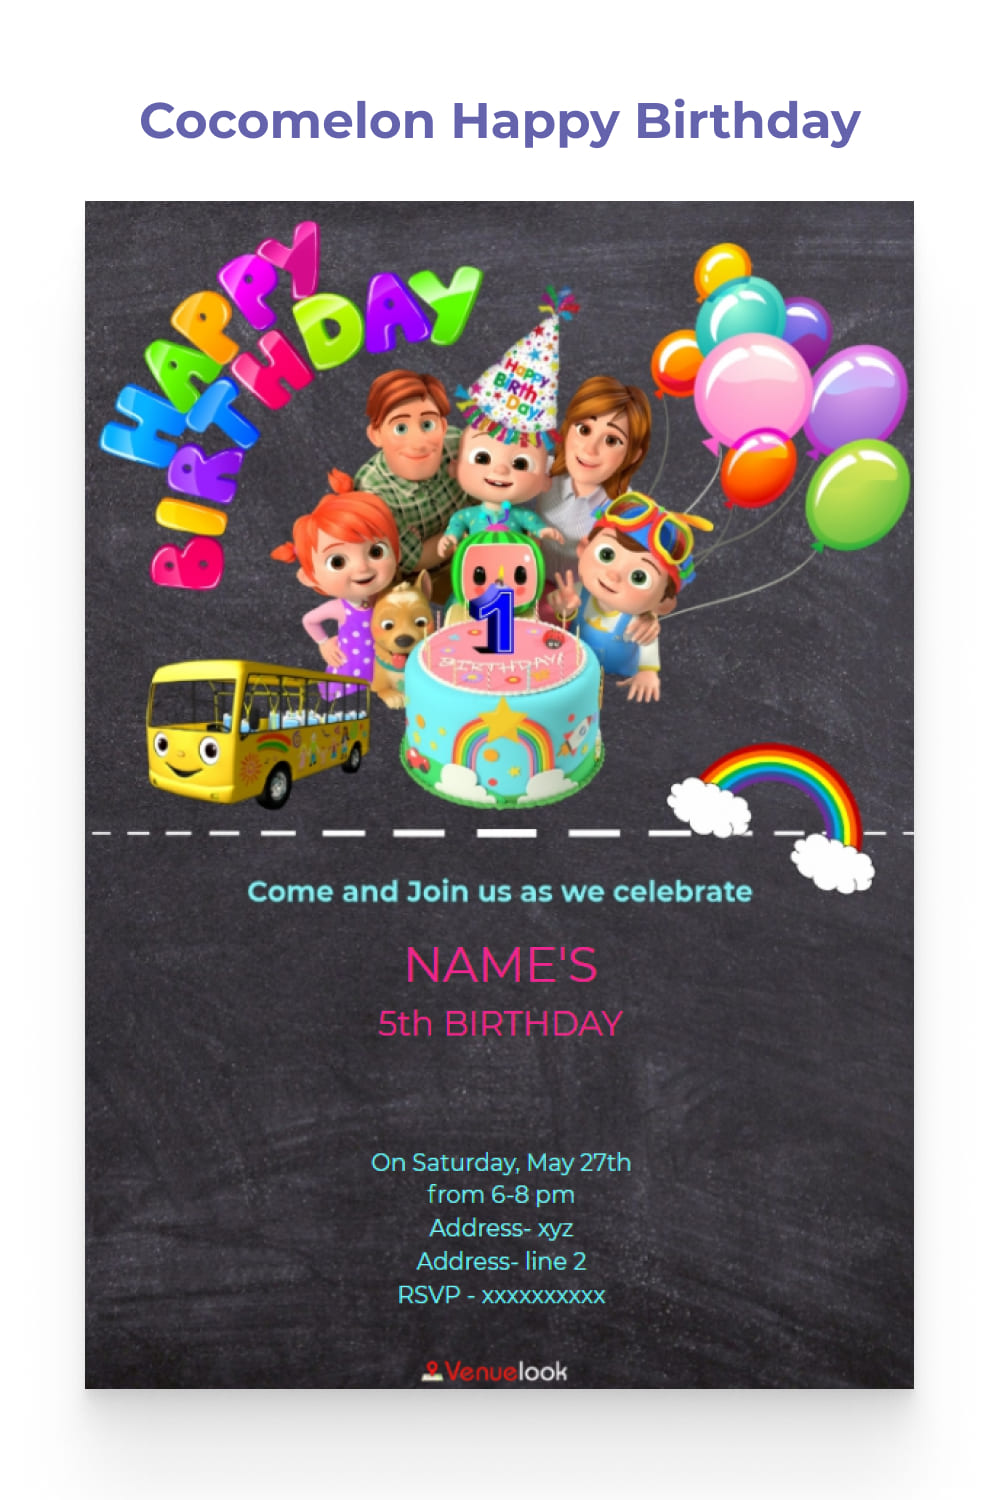 Grey birthday invitation with Cocomelon characters.